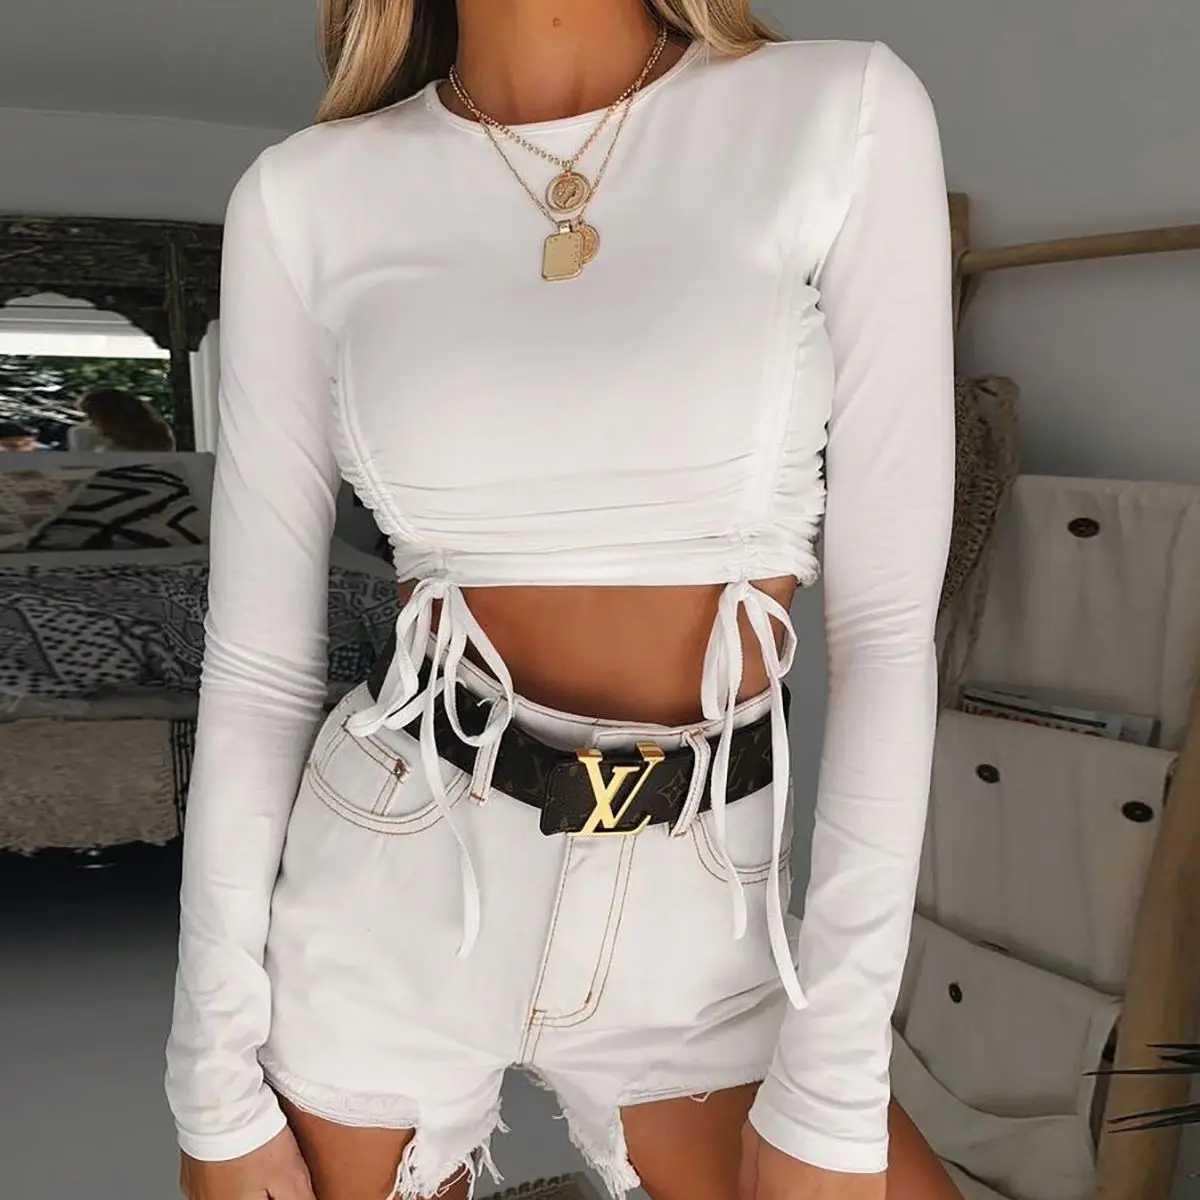 

2021 INS summer women's new long-sleeved solid color bottoming T-shirt tight-fitting navel sexy short women's elegant top, White